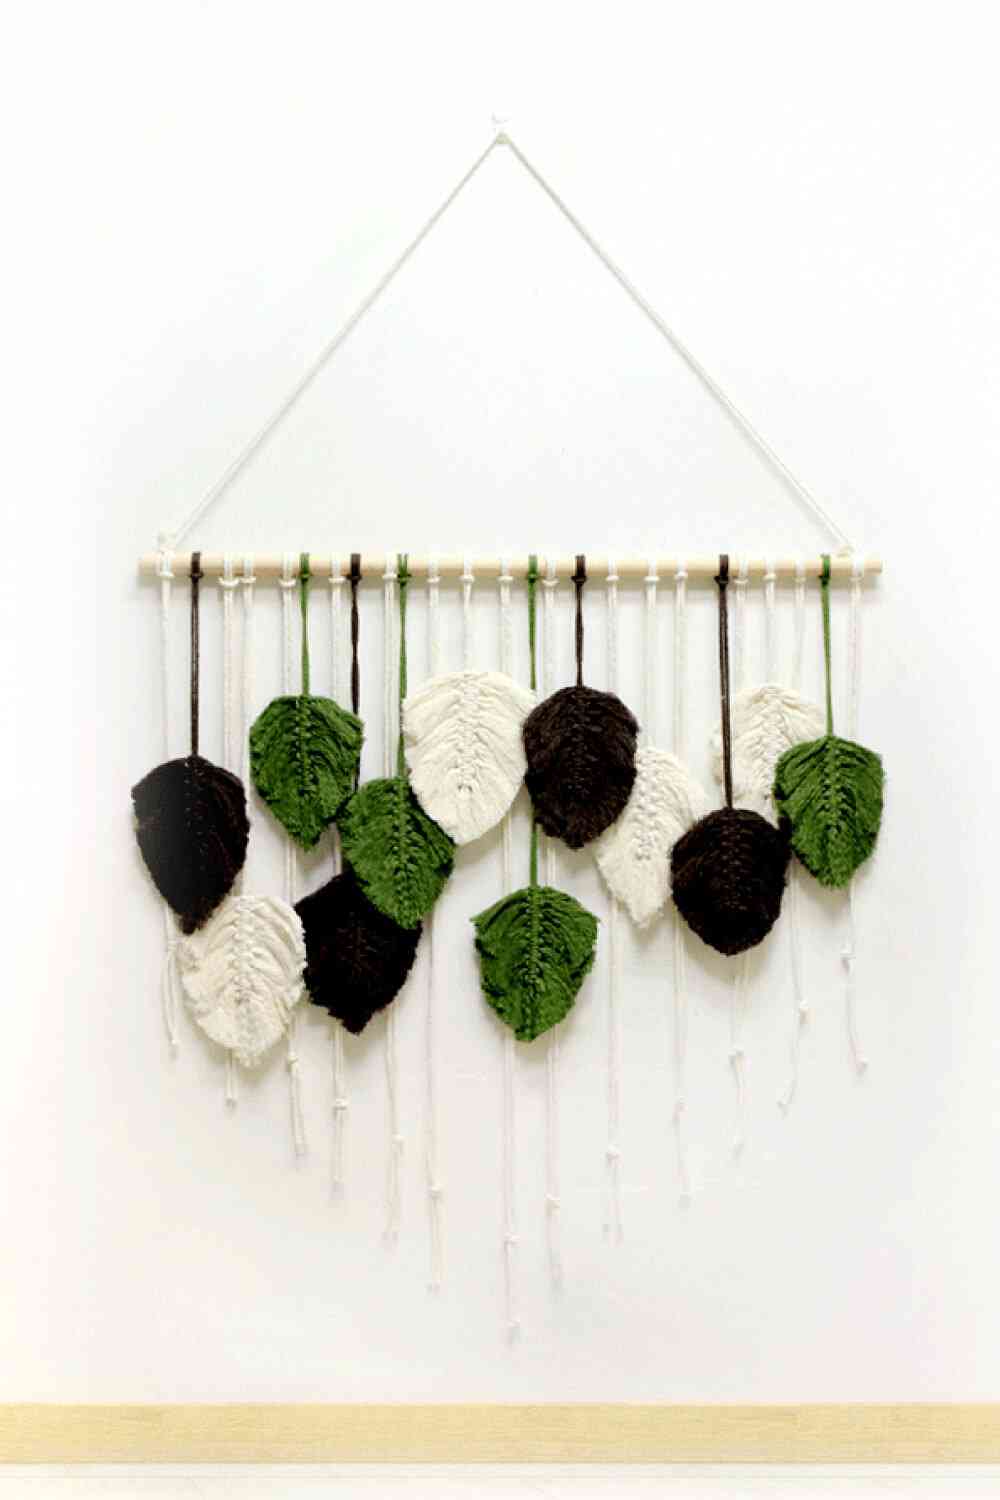 Hand-Woven Feather Macrame Wall Hanging - BloomBliss.com